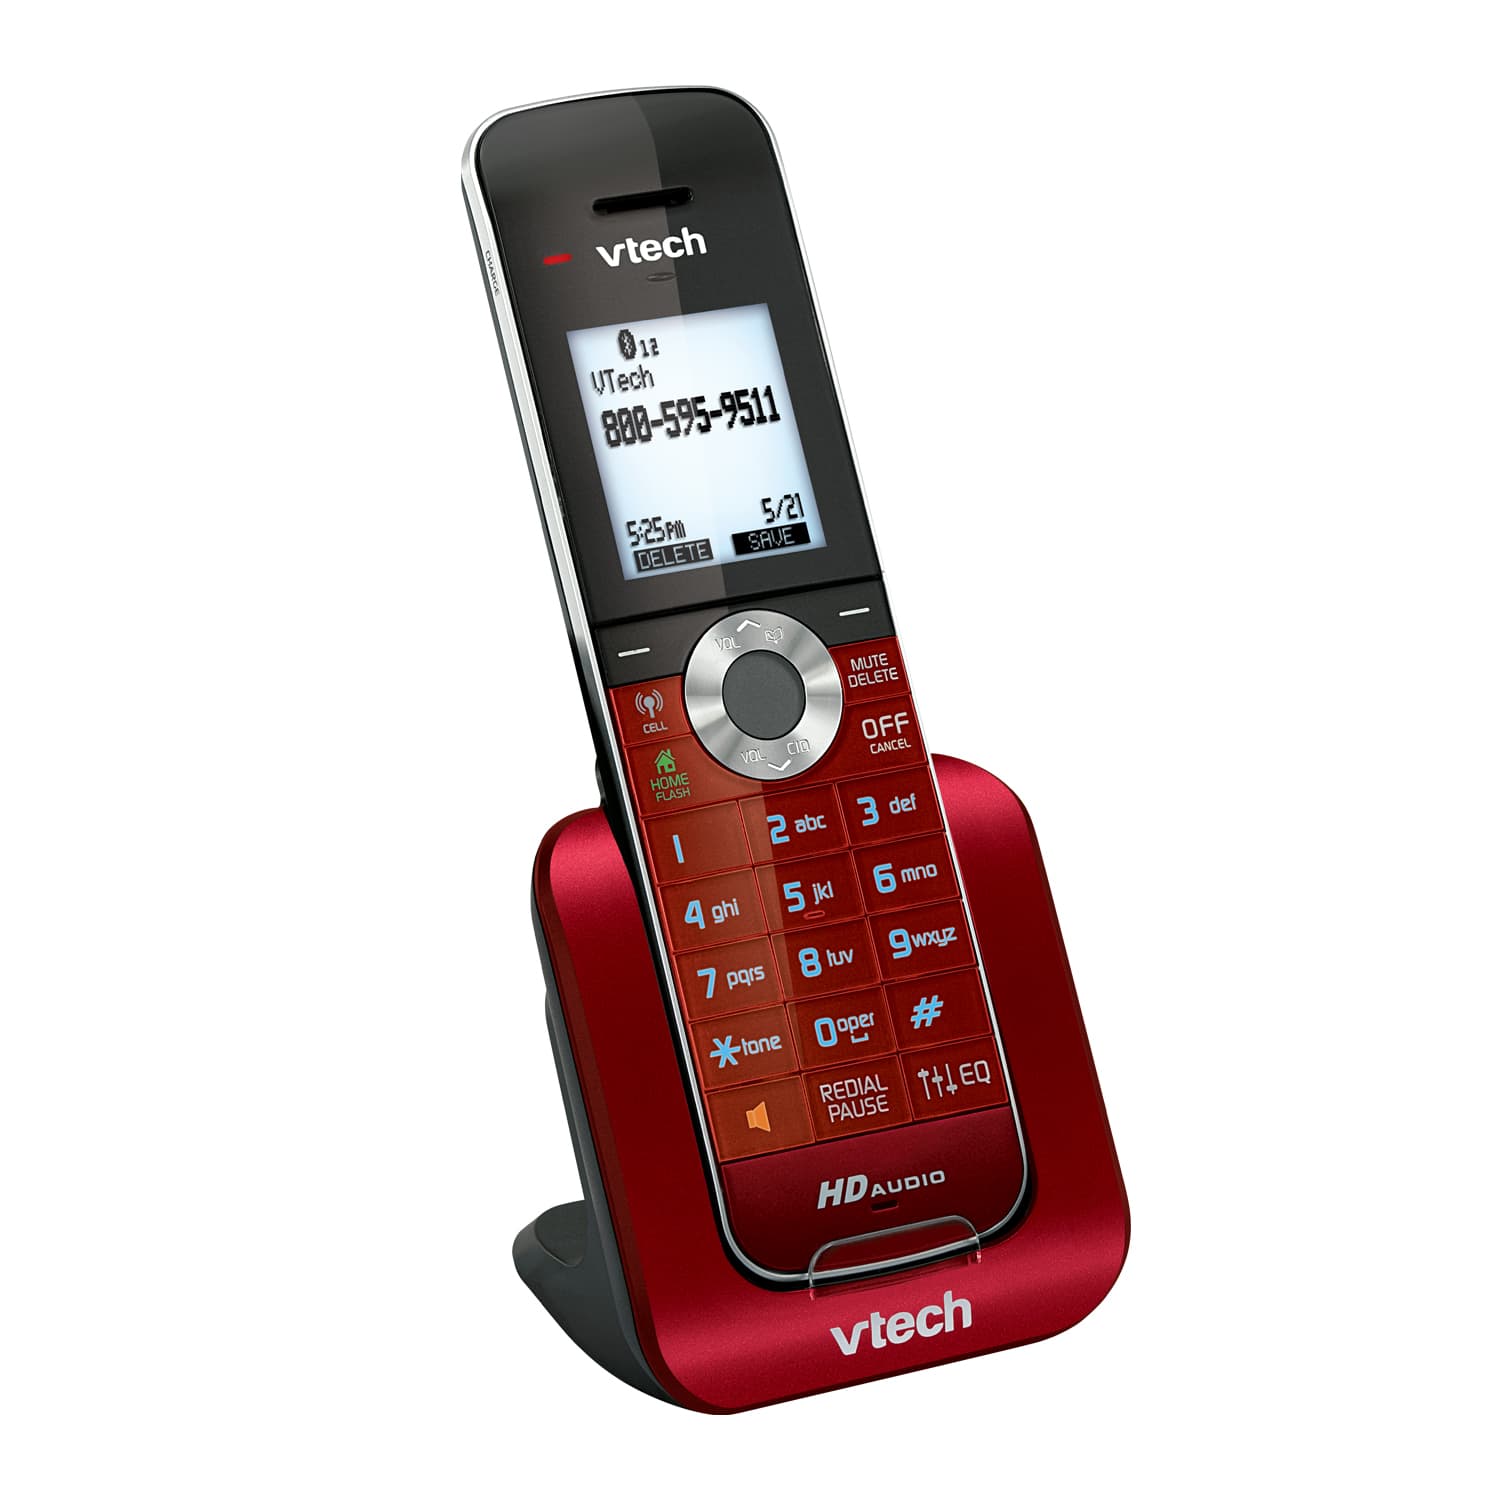 6 Handset Connect to Cell™ Answering System with Caller ID/Call Waiting - view 5